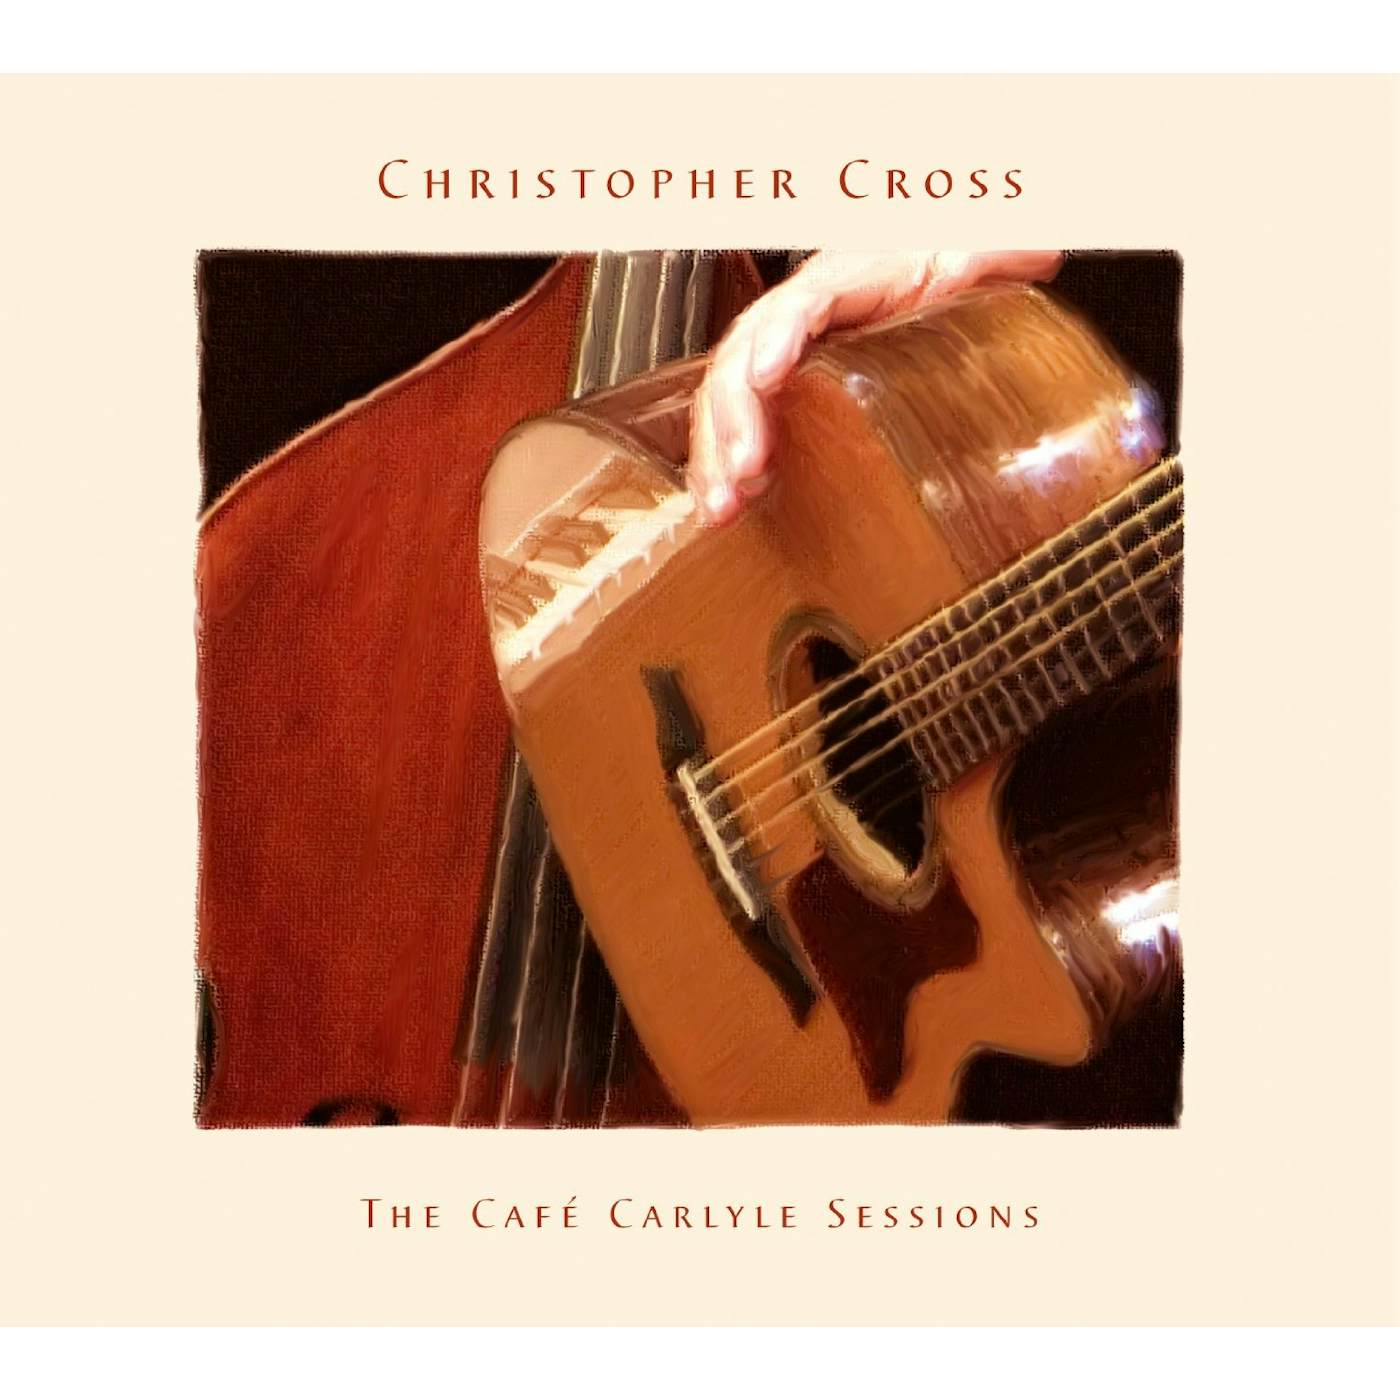 Christopher Cross CAFE CARLYLE SESSIONS Vinyl Record